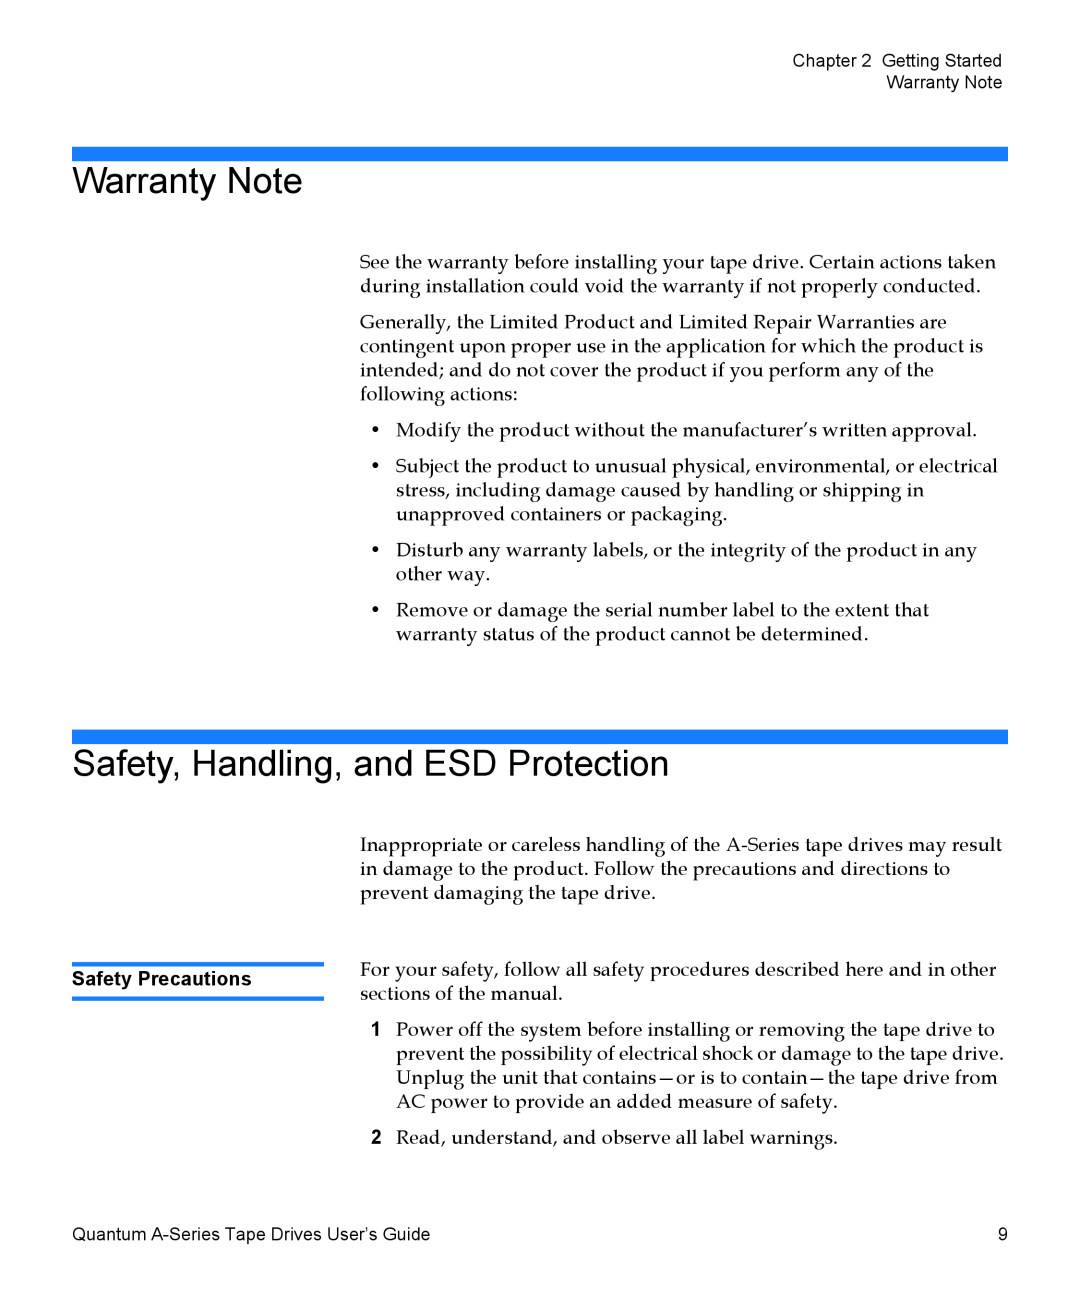 Quantum A-Series manual Warranty Note, Safety, Handling, and ESD Protection, Safety Precautions 